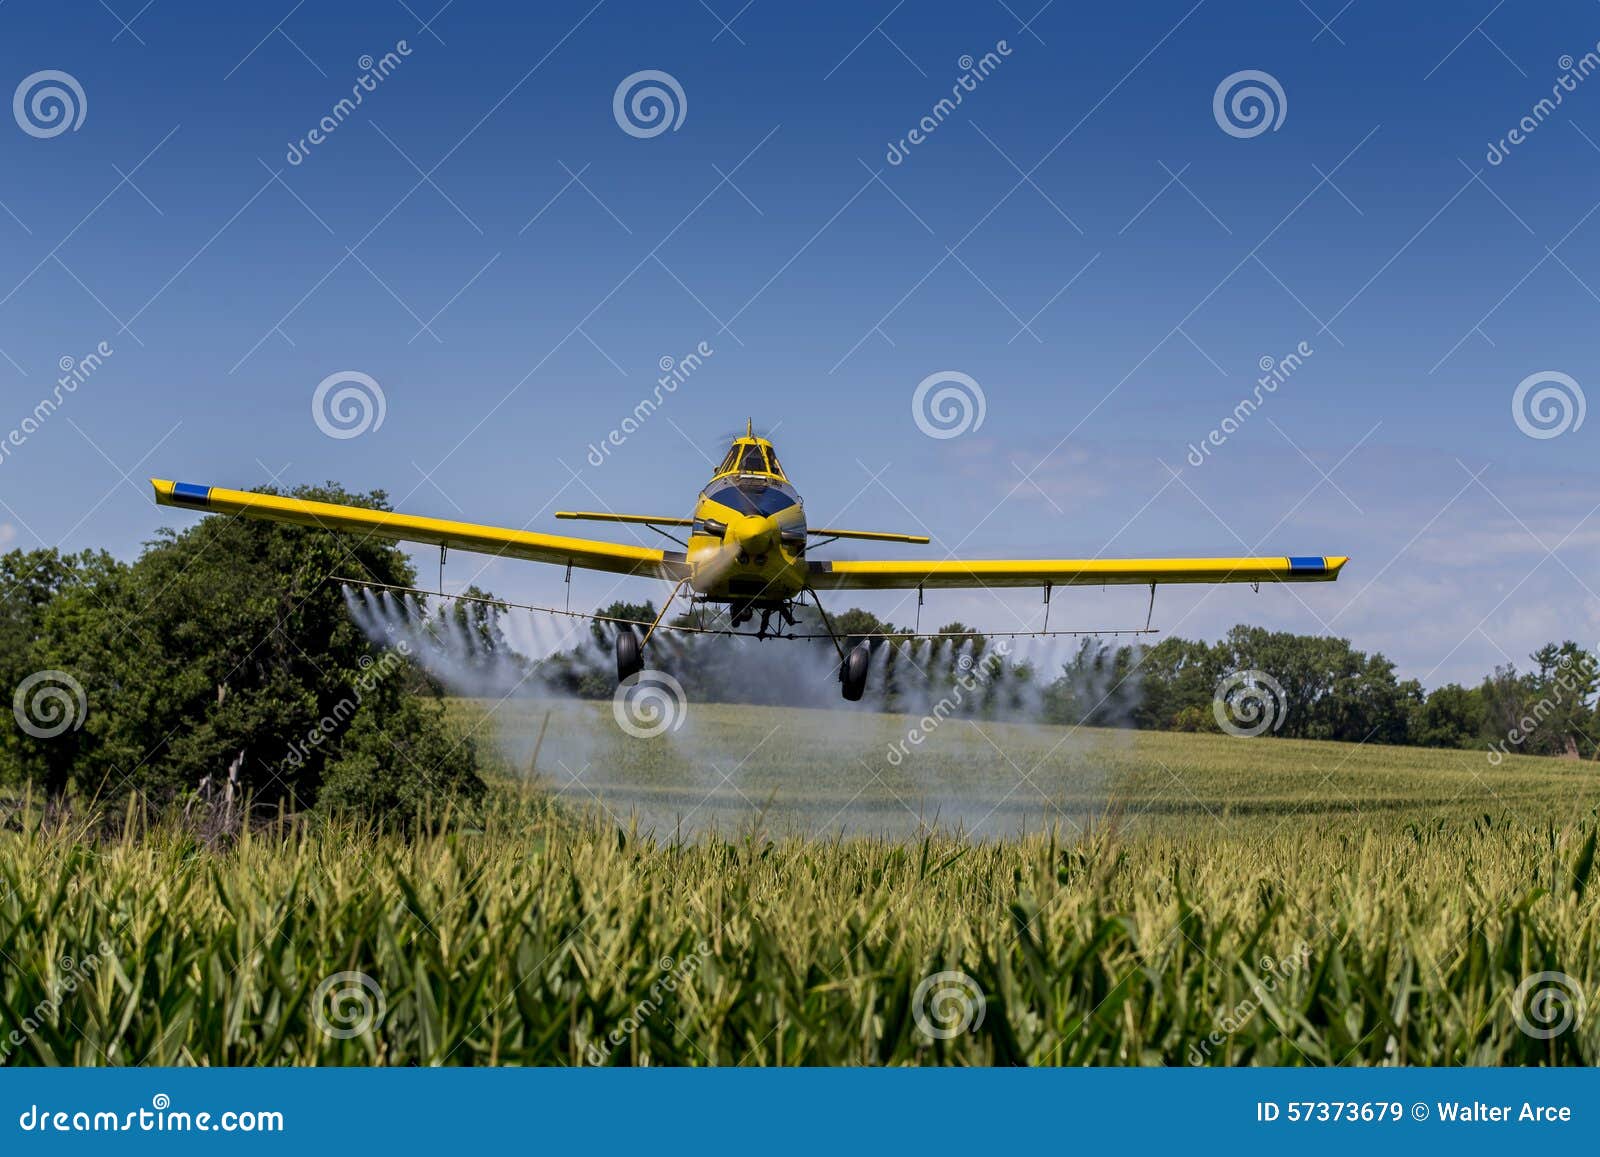 yellow crop duster